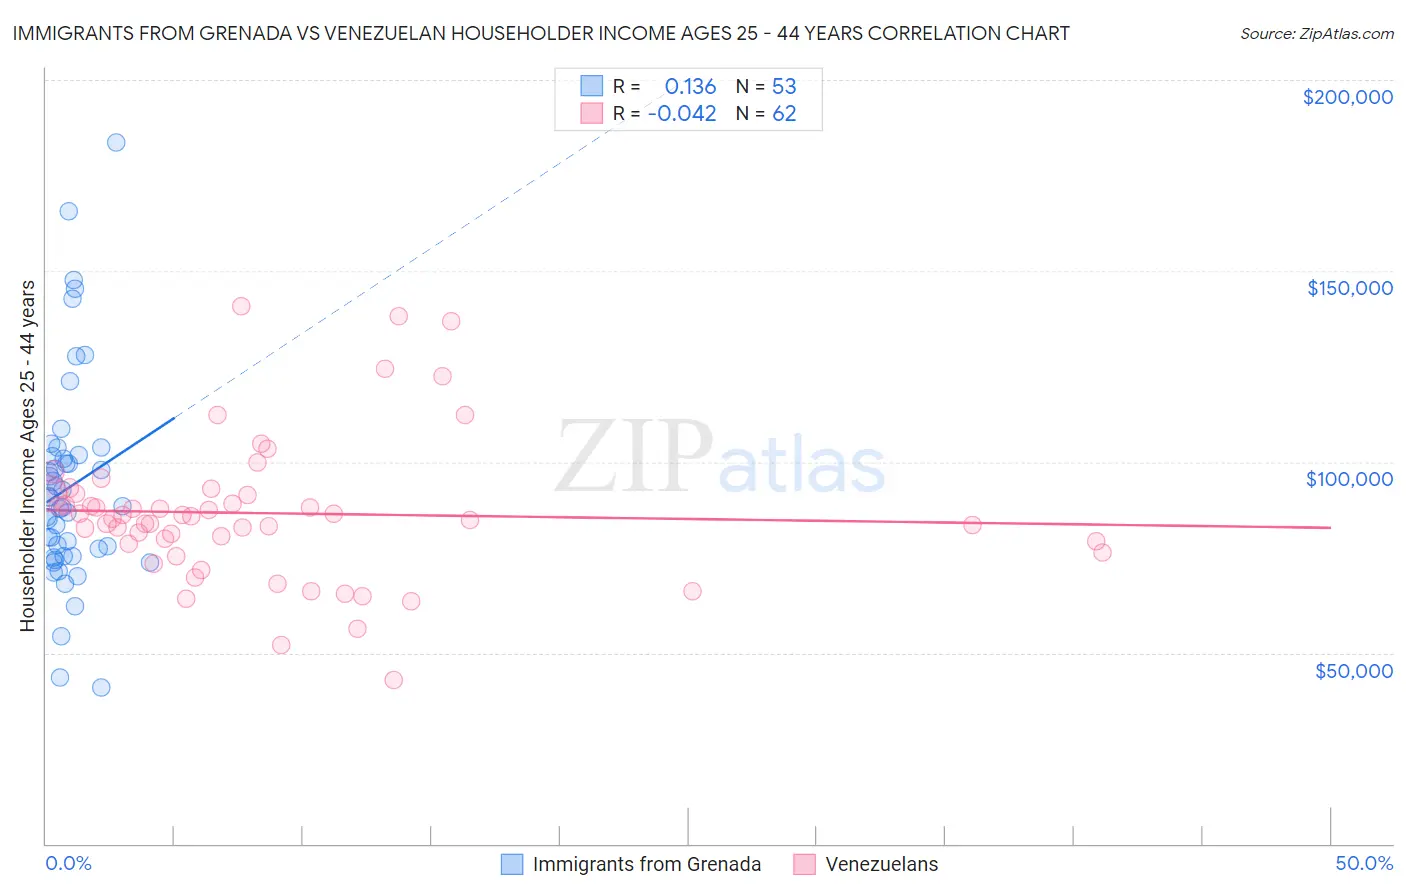 Immigrants from Grenada vs Venezuelan Householder Income Ages 25 - 44 years